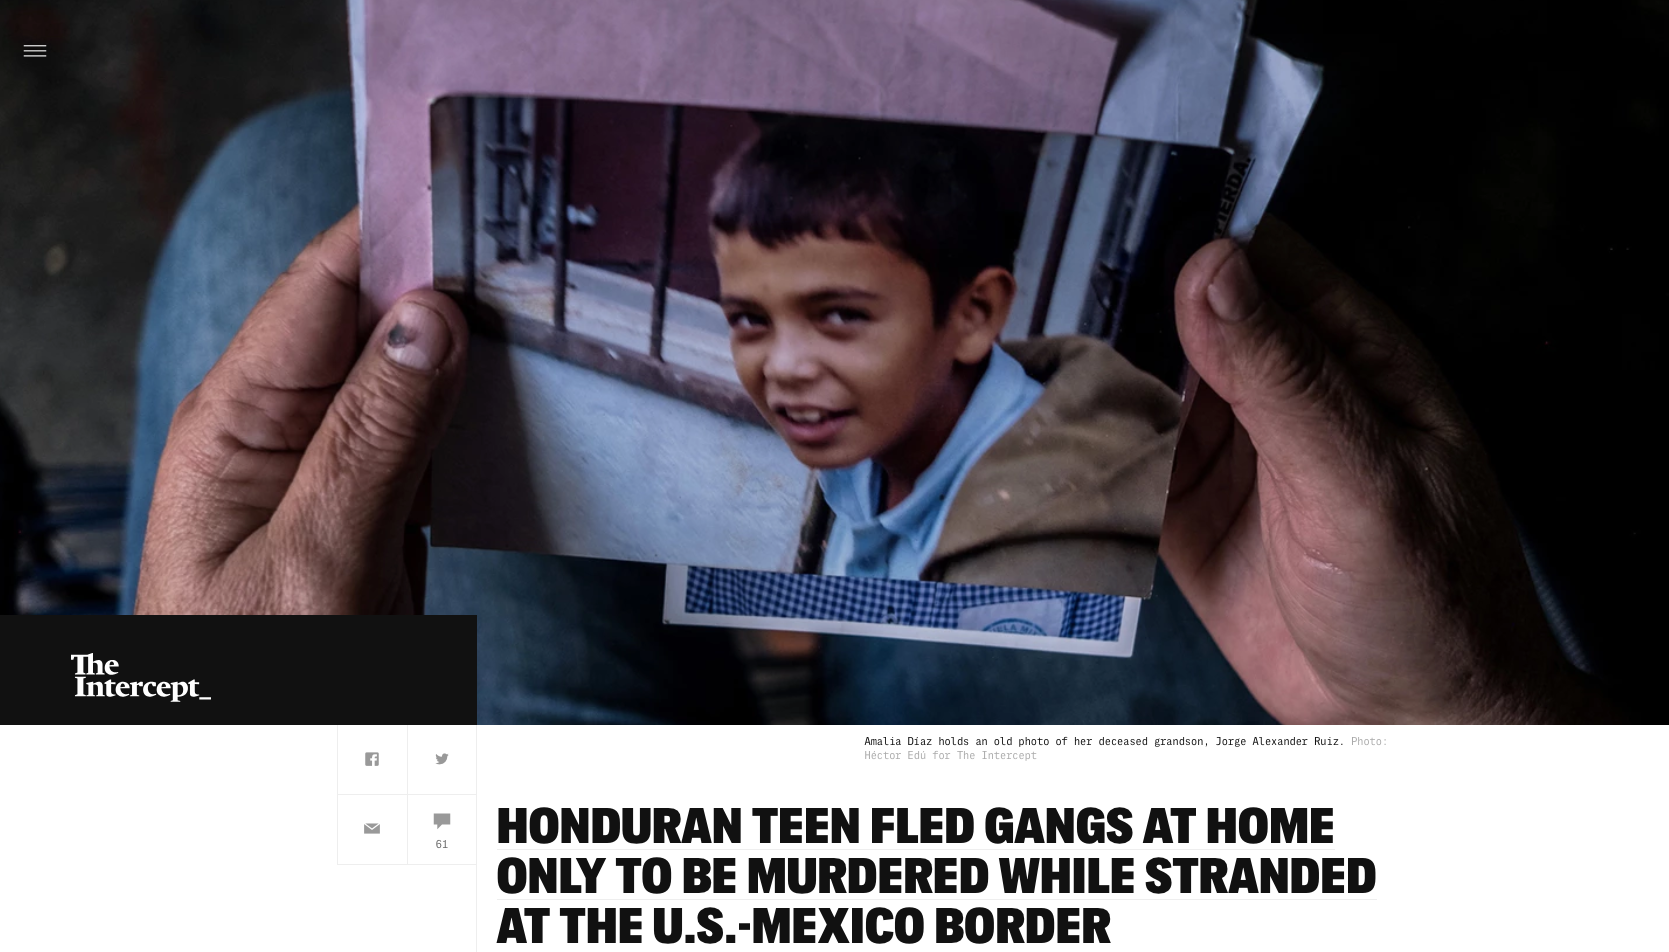  Photography: Héctor Edú  Photo Editing: Ariel Zambelich  Story:  Honduran Teen Fled Gangs At Home Only To Be Murdered While Stranded At The U.S.-Mexico Border  